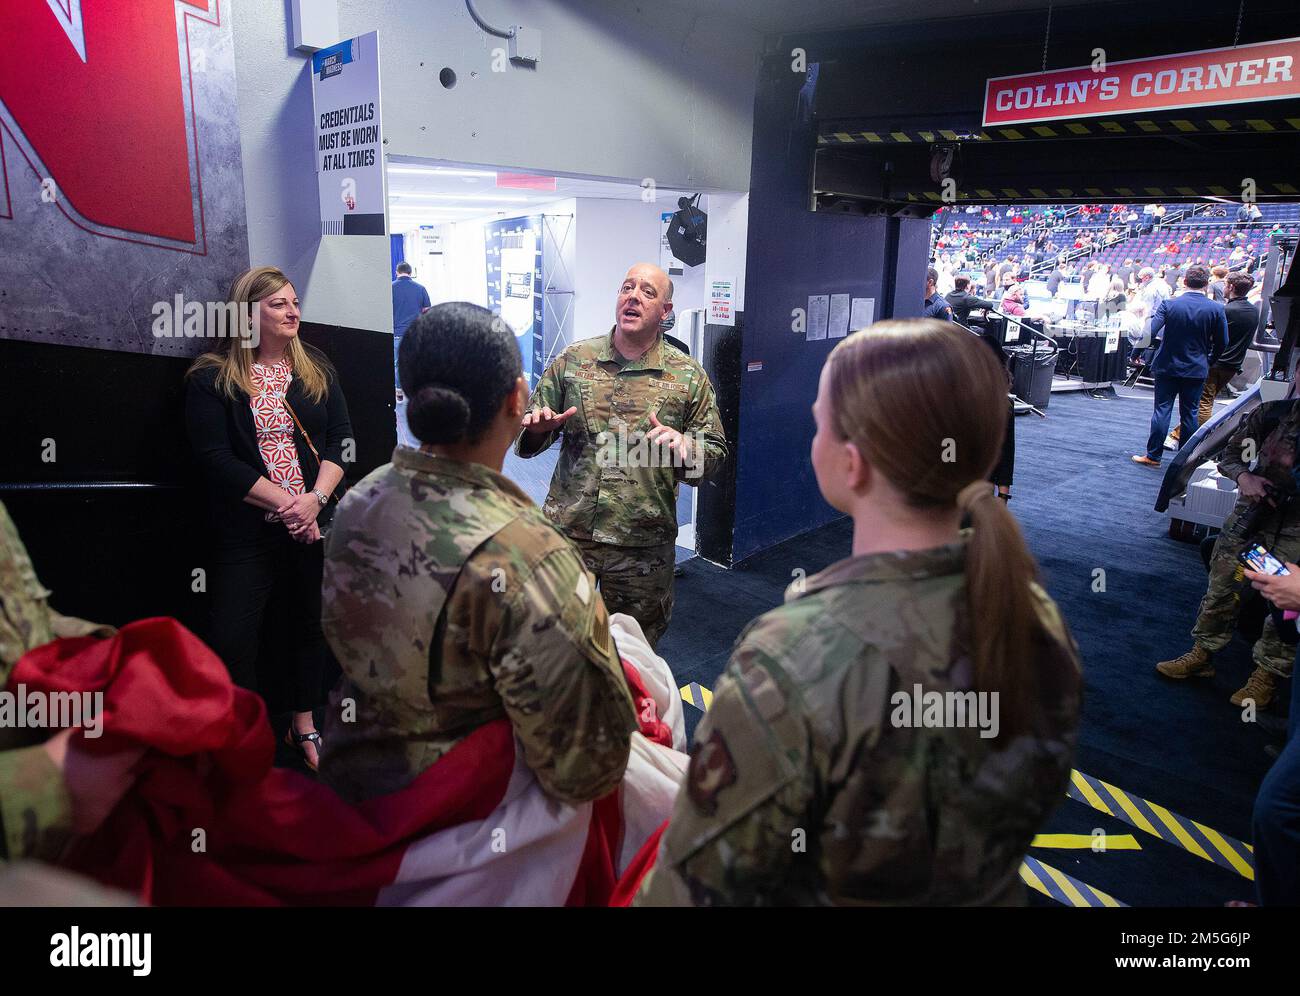 Col. Patrick Miller, 88th Air Base Wing and Wright-Patterson Air Force Base commander, visits with some of his Airmen before they carry a large American flag out onto the floor of University of Dayton Arena on March 16, 2022, for the opening ceremony of the NCAA men’s basketball tournament game between Wright State and Bryant. The Air Force was also represented by the Wright-Patterson Honor Guard. Stock Photo